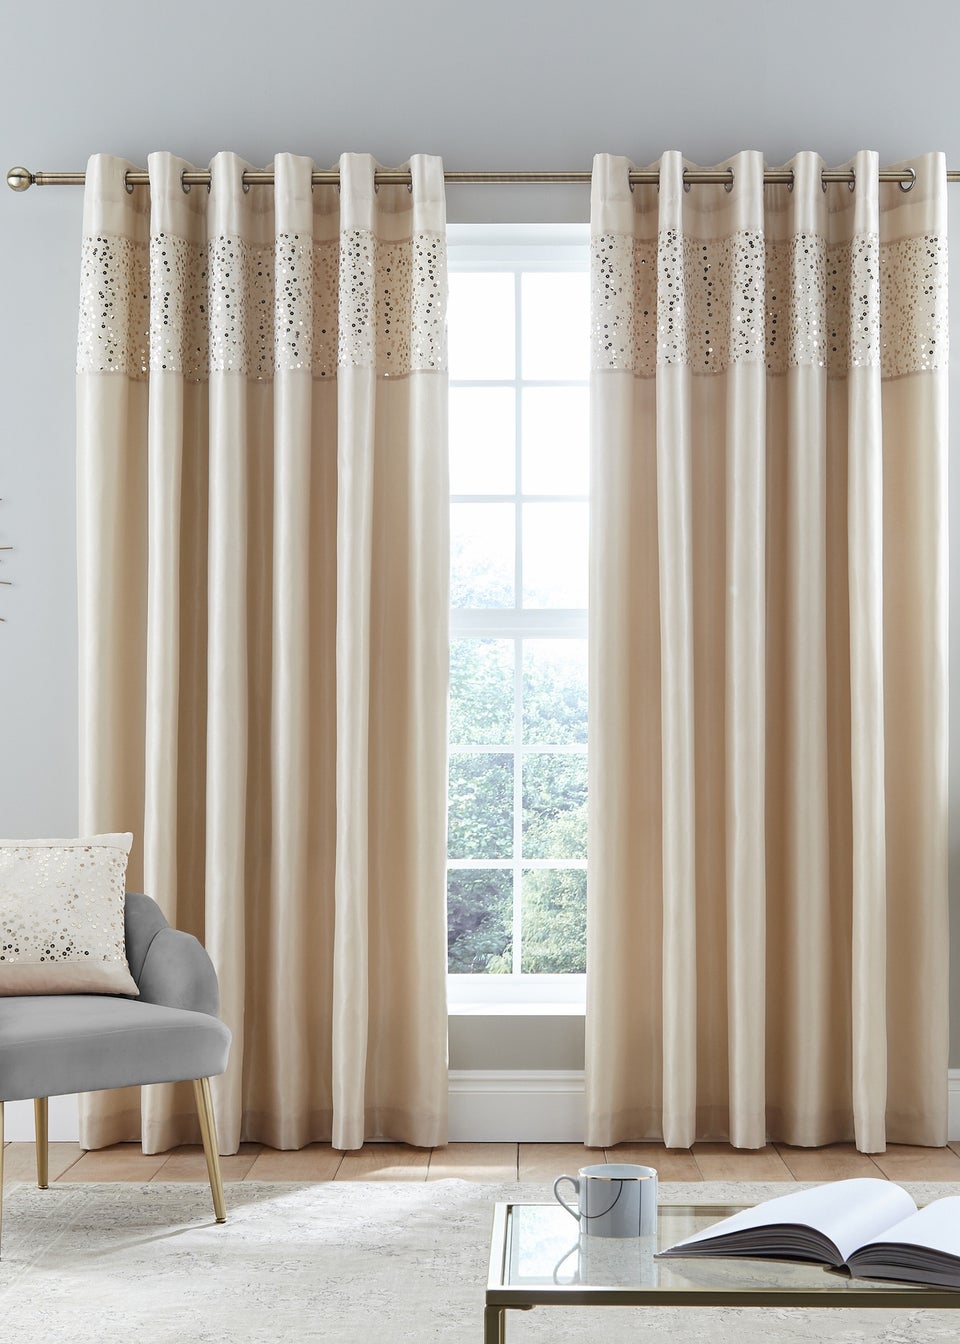 Catherine Lansfield Glitzy Sequin Lined Eyelet Curtains